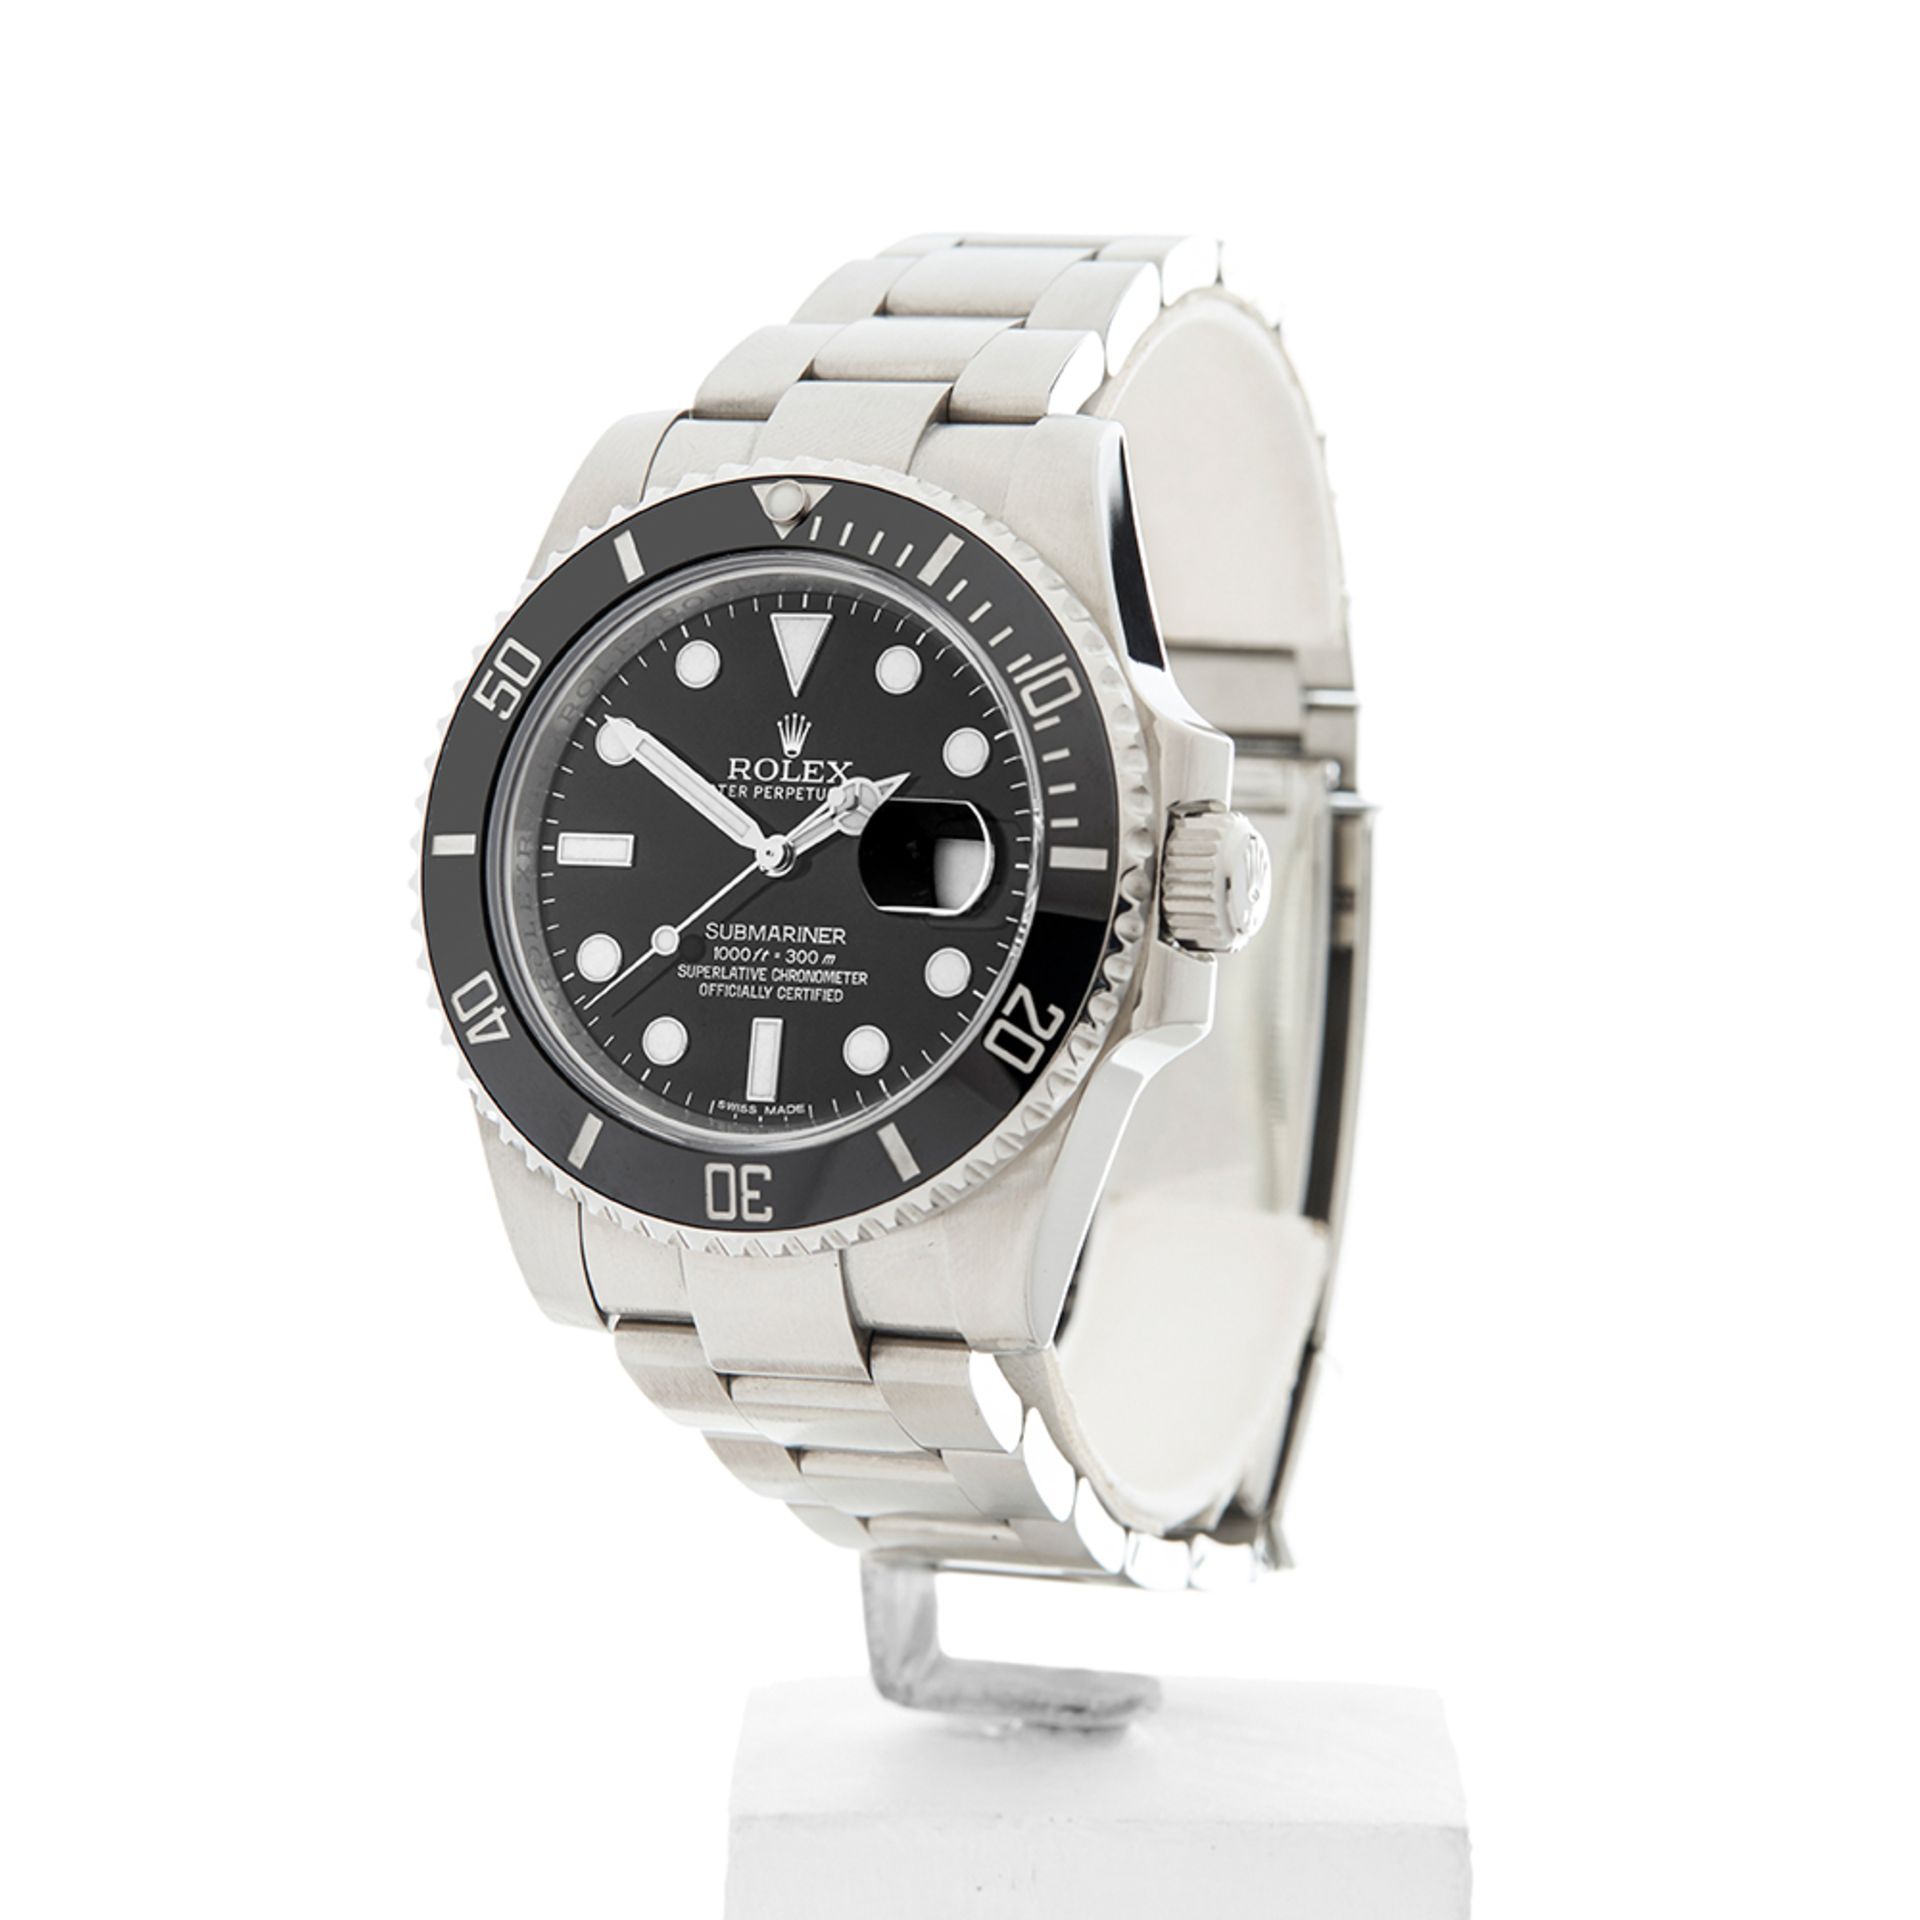 Rolex Submariner Date 40mm Stainless Steel 116610LN - Image 3 of 8